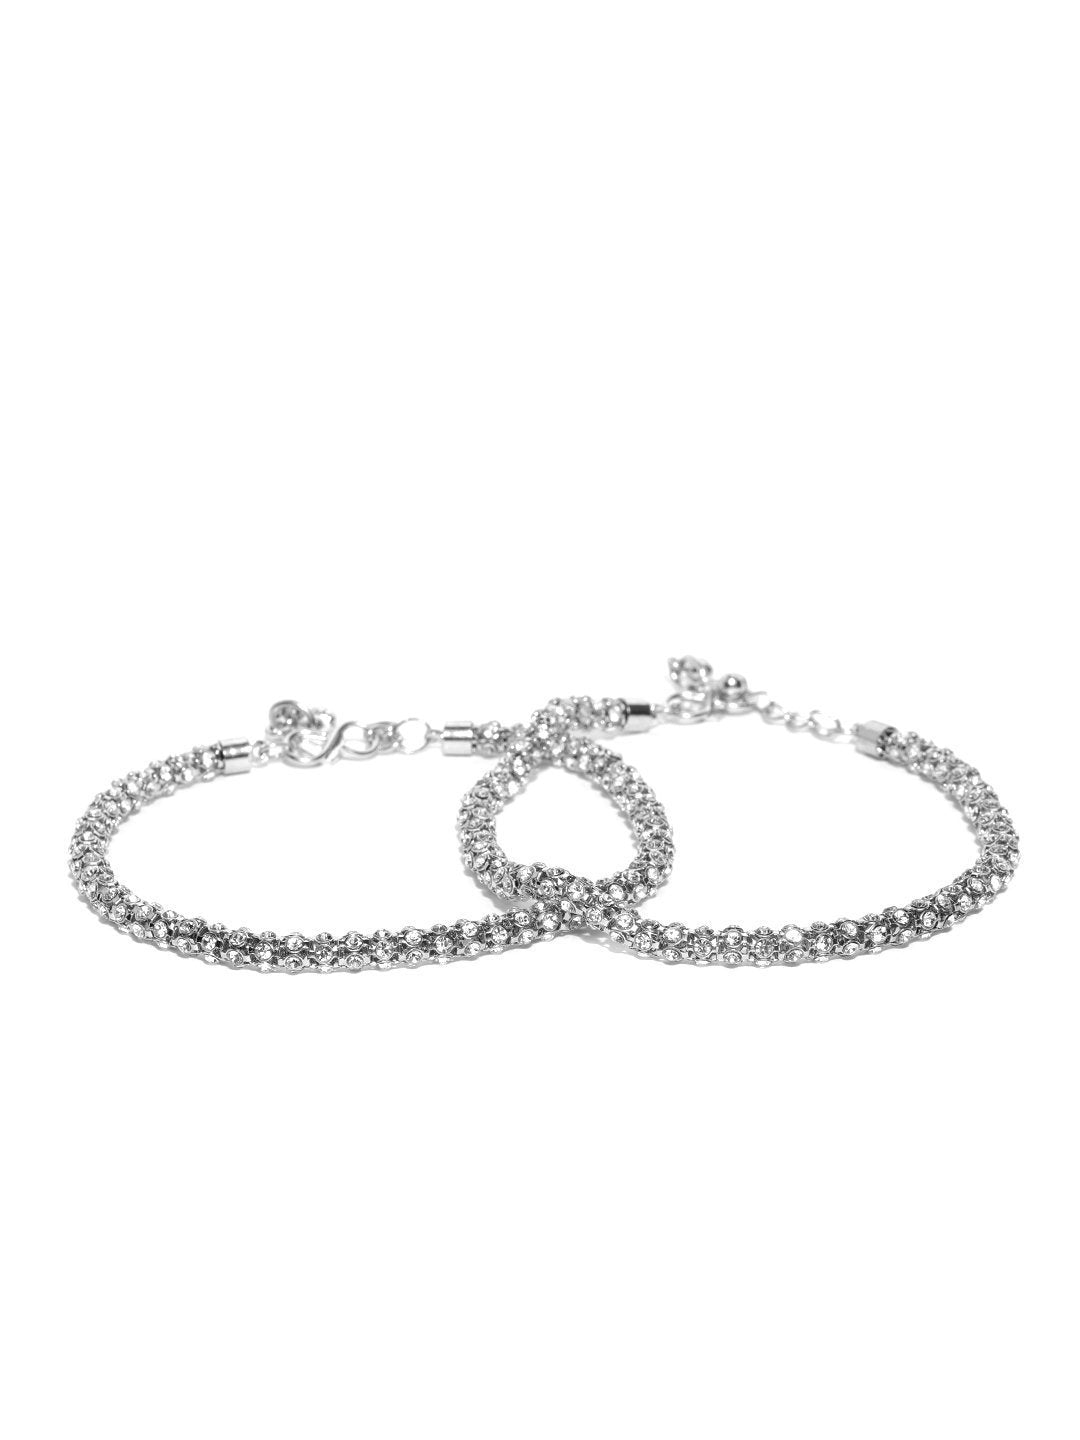 Women's Silver-Toned Stone-Studded Anklets For Women And Girls - Priyaasi